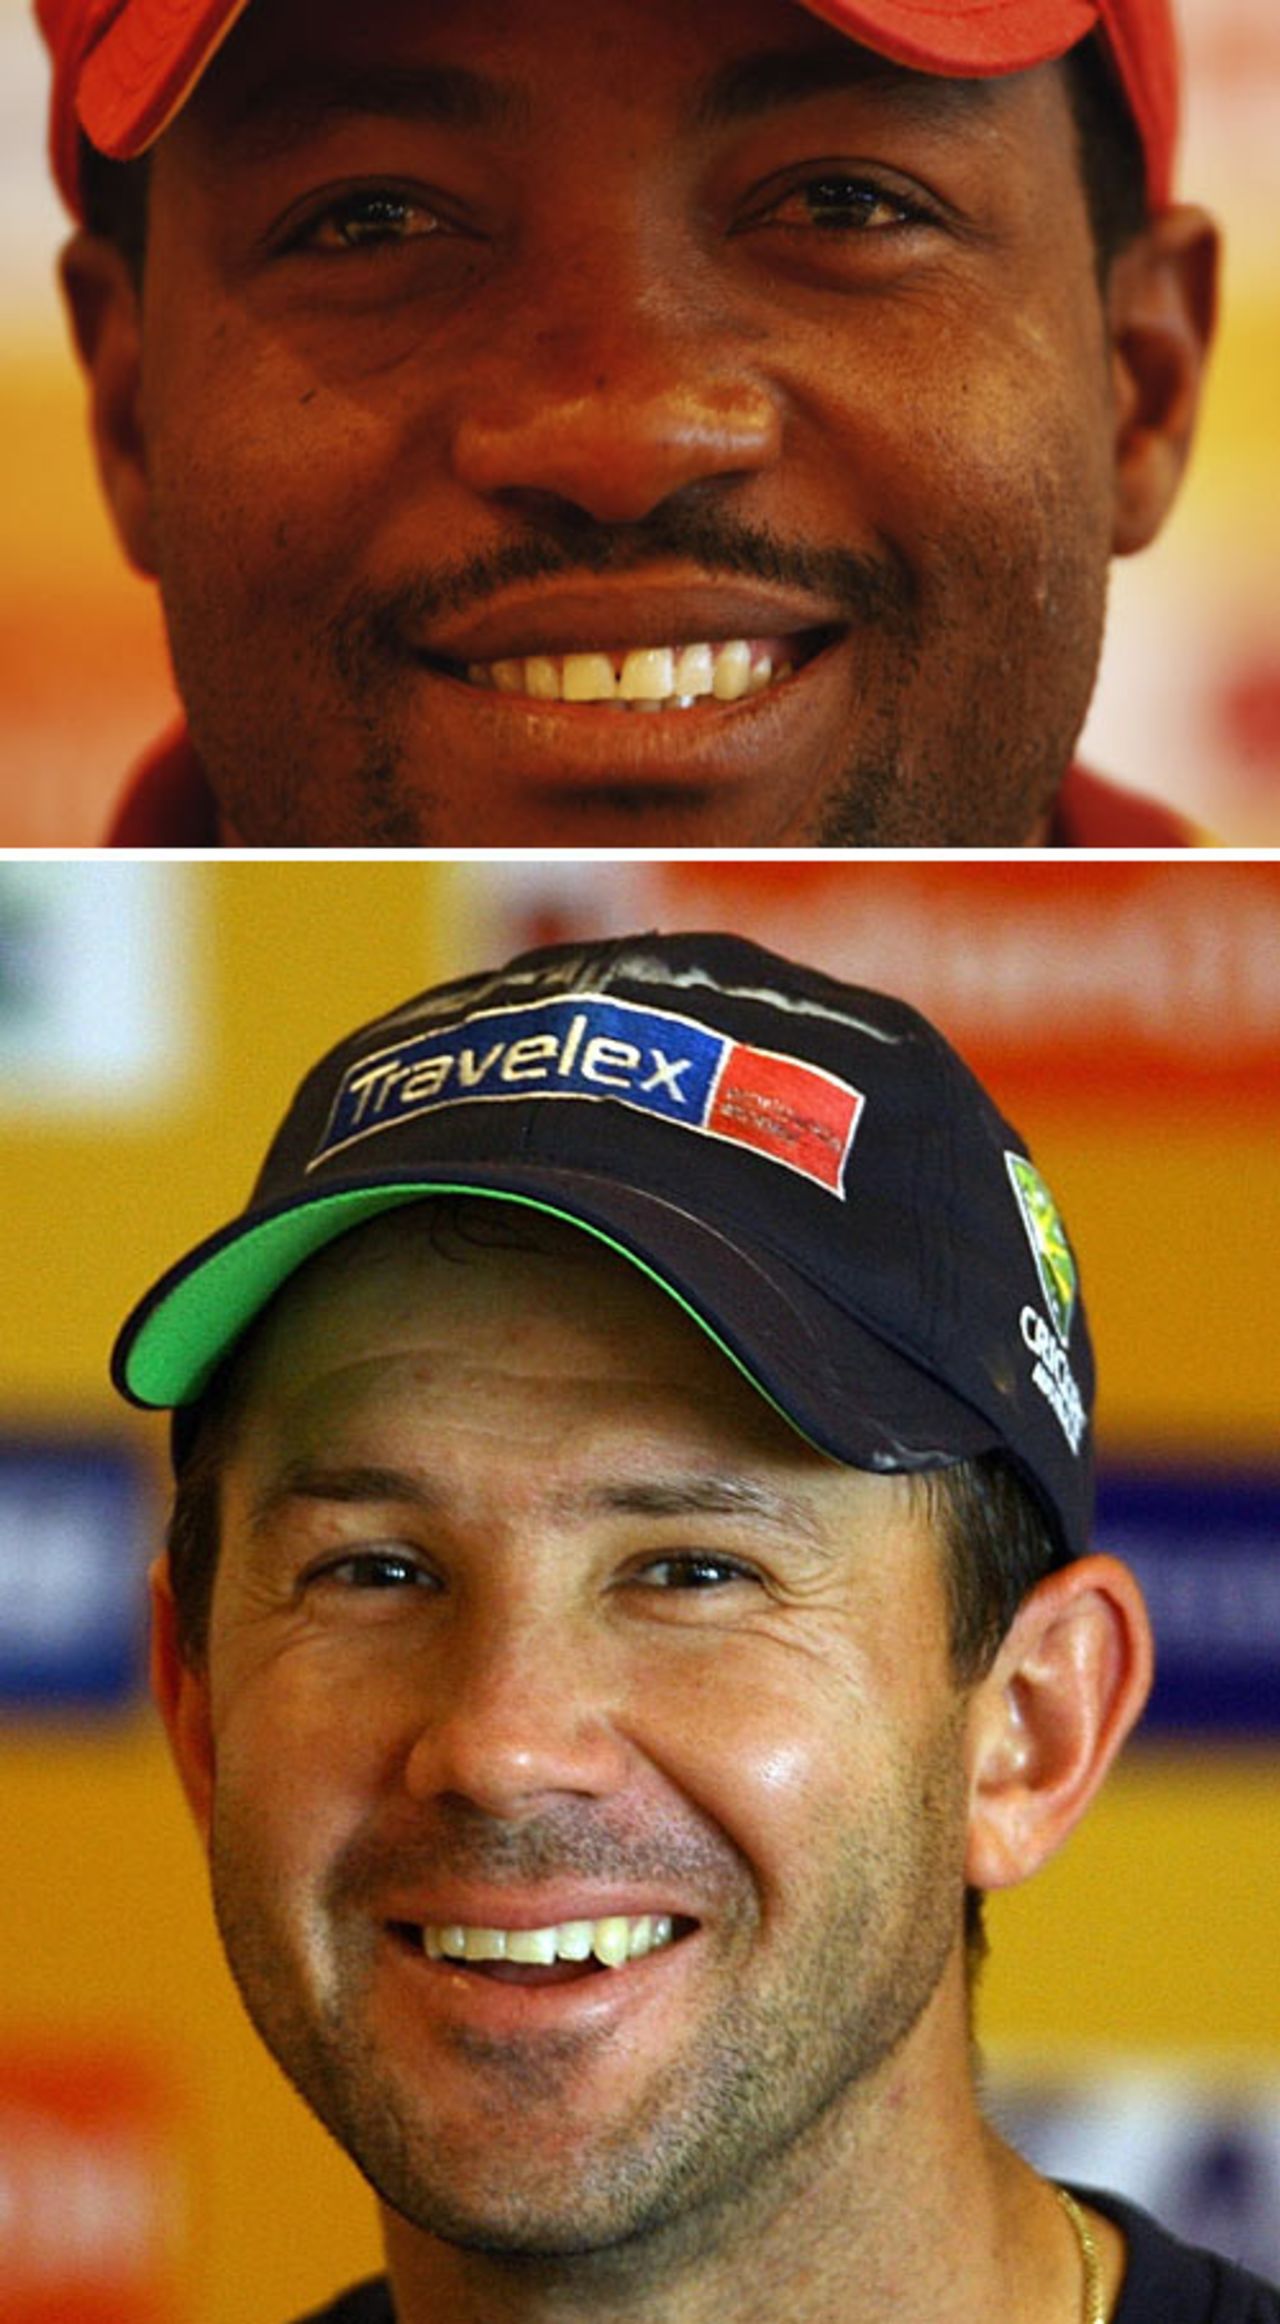 The two captains for the ICC Champions Trophy, Brian Lara and Ricky Ponting, Mumbai, November 4, 2006